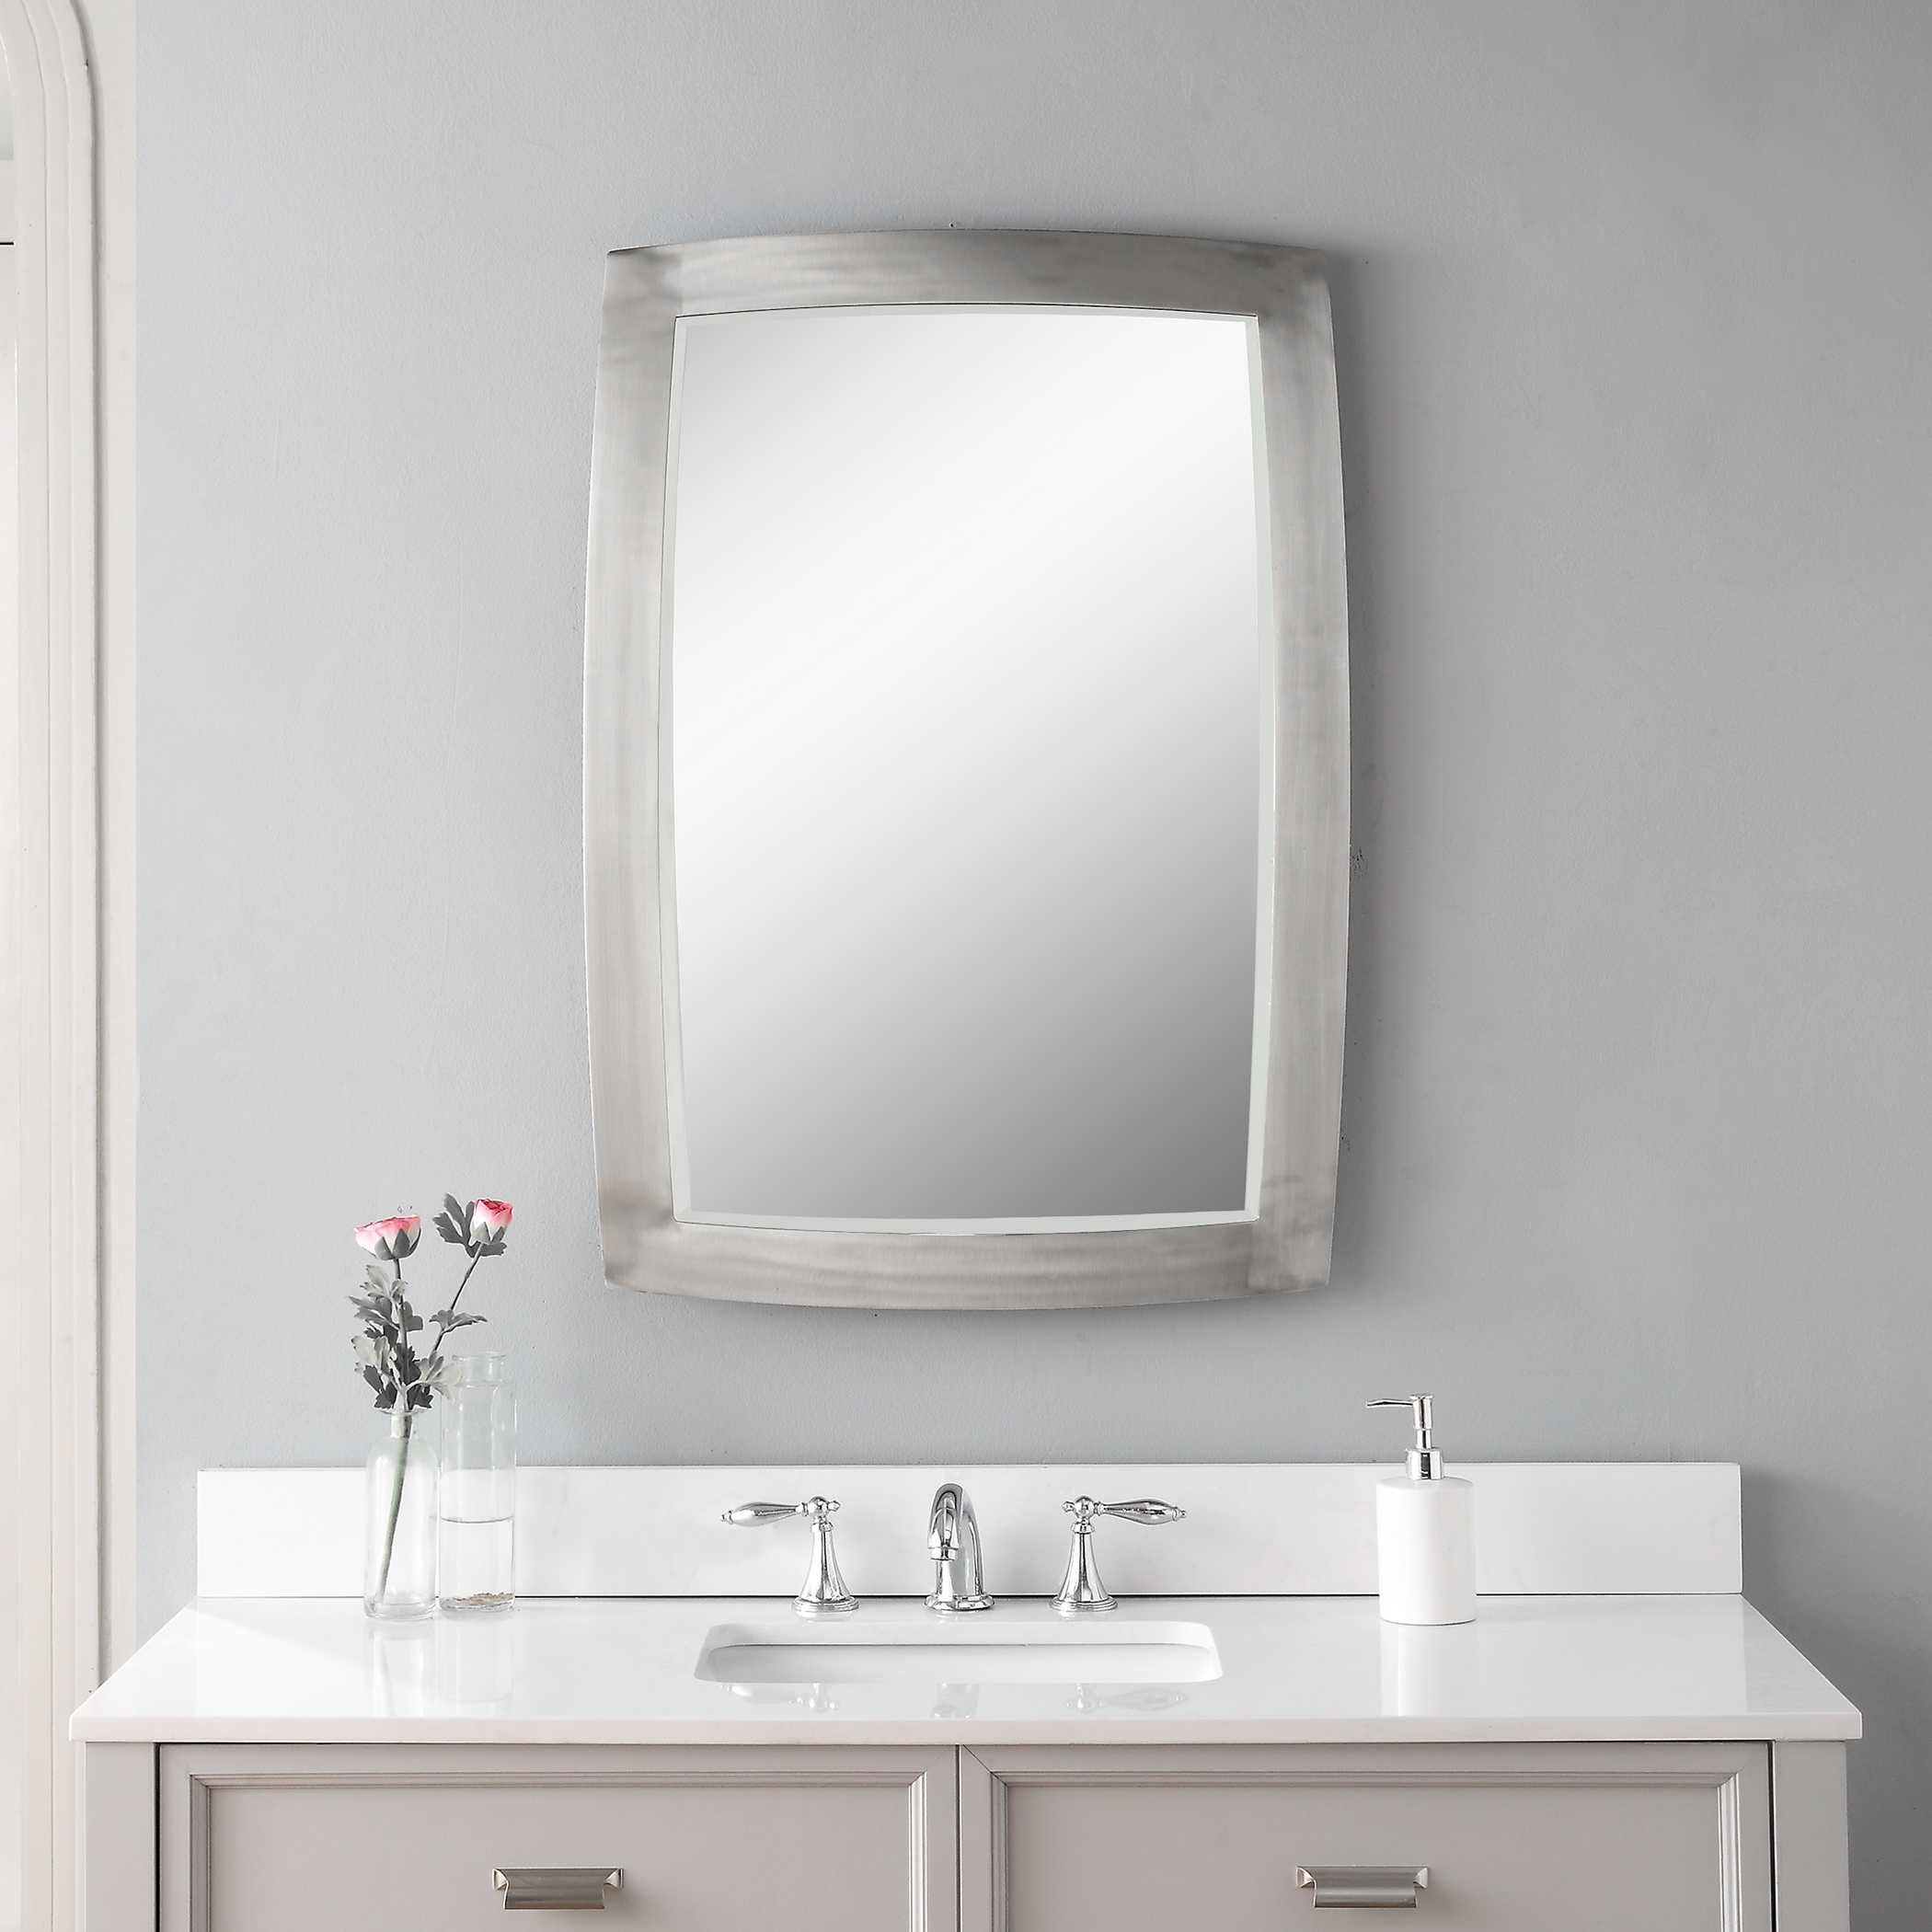 Uttermost Mirrors Haskill Brushed Nickel Mirror | Sheely's Furniture Throughout Drake Brushed Steel Wall Mirrors (View 3 of 15)